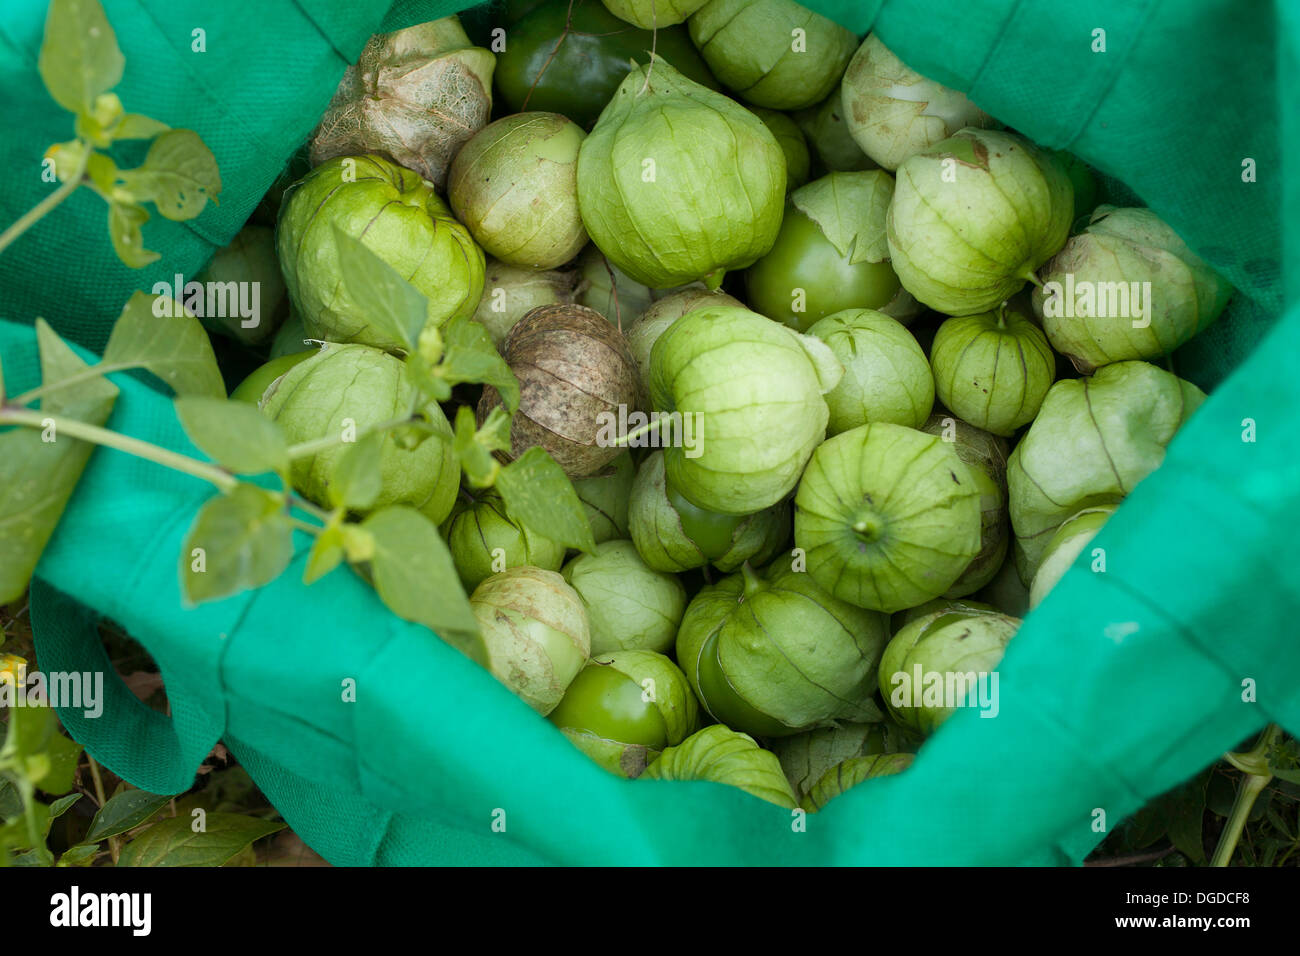 Tomatillos are still producing near the end of the growing season.  Leaf and flower are hanging over edge of bag. Stock Photo